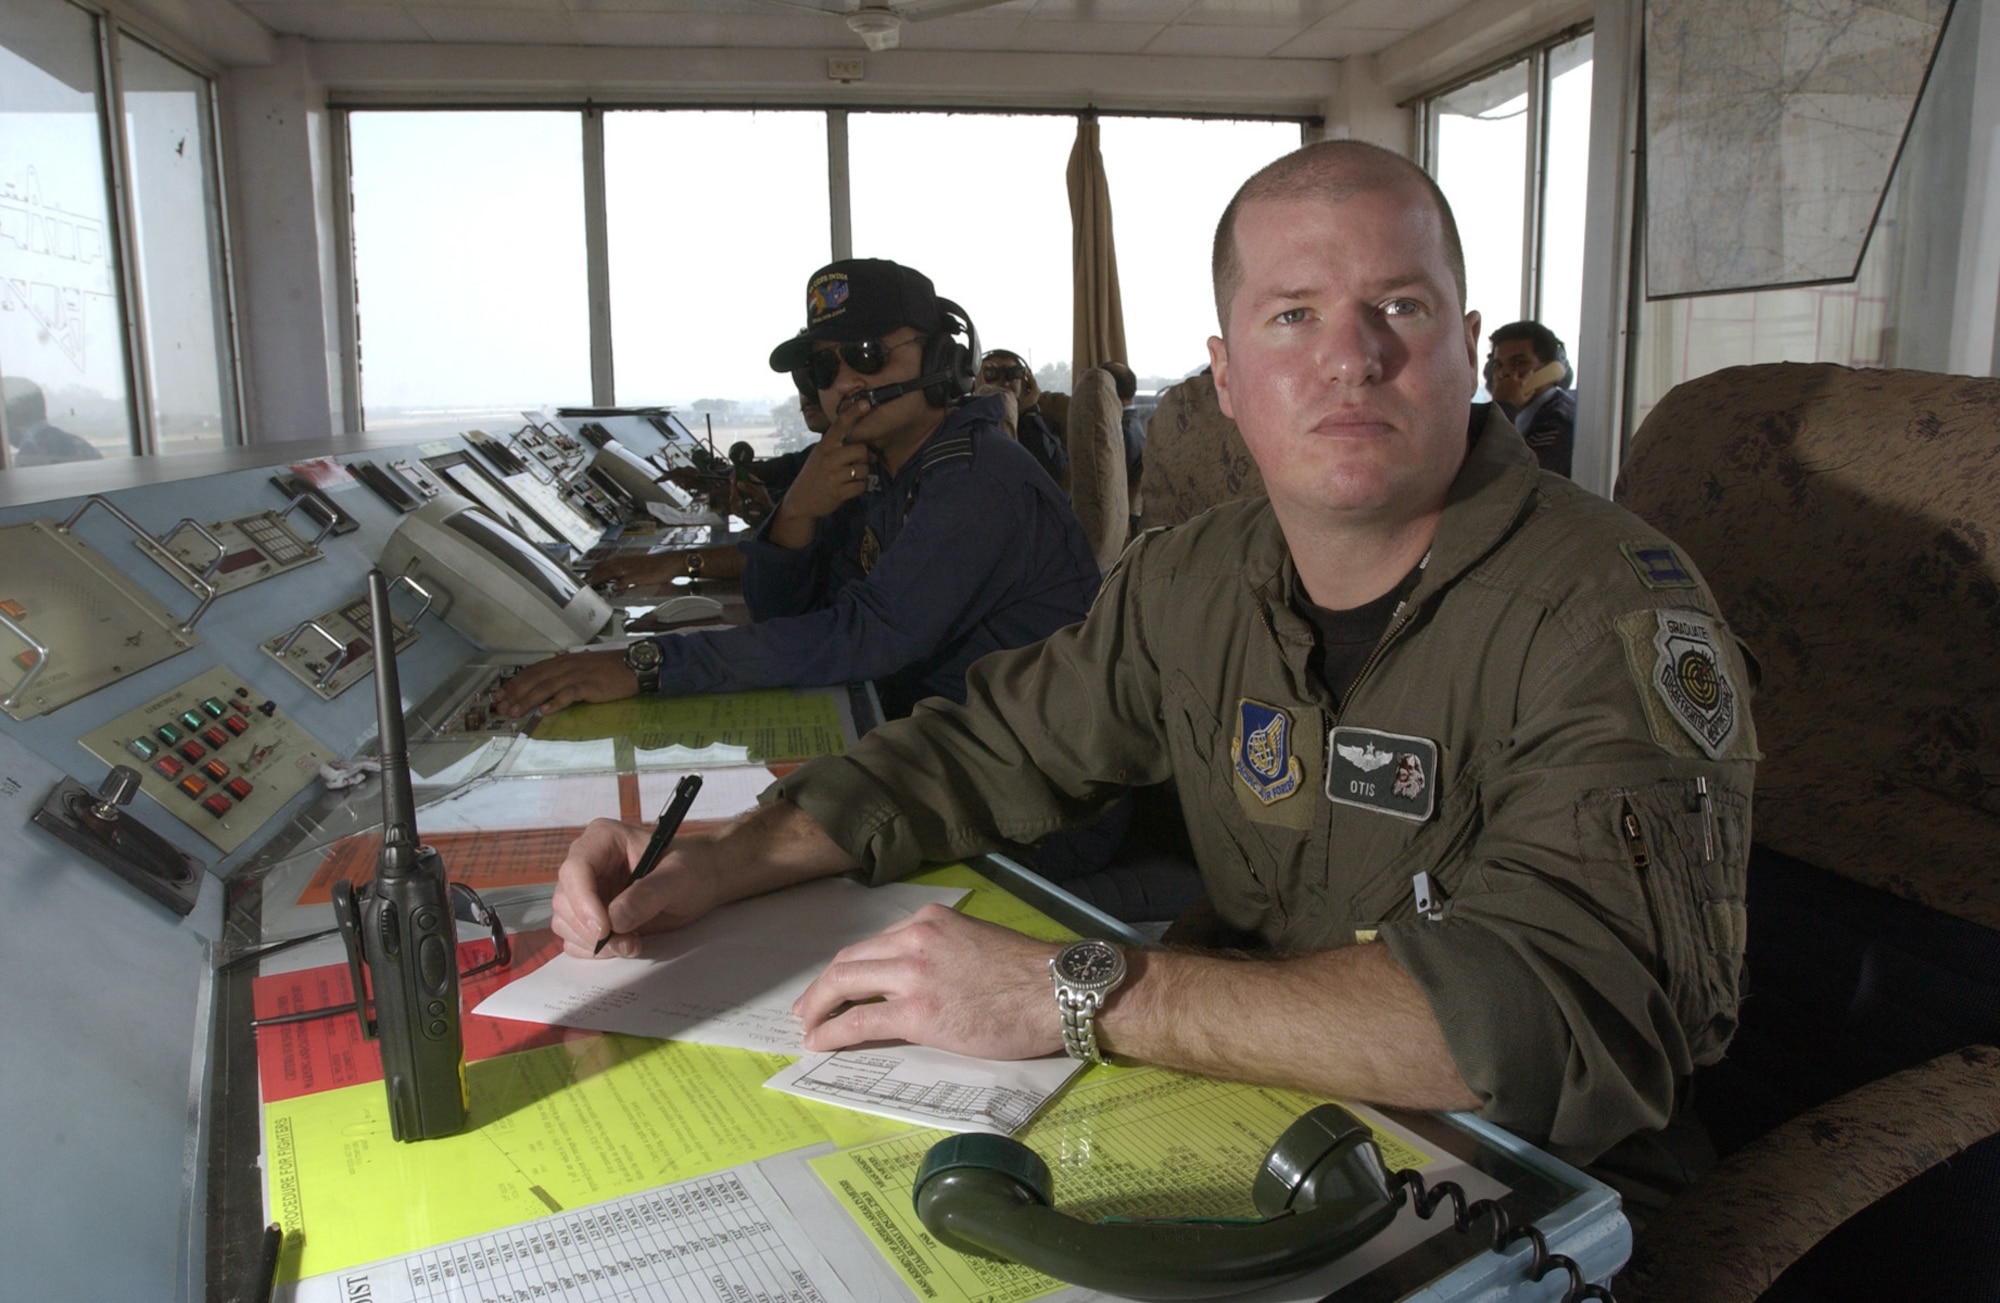 GWALIOR AIR FORCE STATION, India -- Capt. Mark Snowden performs flight safety duties in the control tower here during Cope India '04.  The bilateral fighter exercise between Indian and U.S. air forces is the first of its kind in more than 40 years.  Captain Snowden is an F-15 Eagle pilot from Elmendorf Air Force Base, Alaska.  (U.S. Air Force photo by Tech. Sgt. Keith Brown)